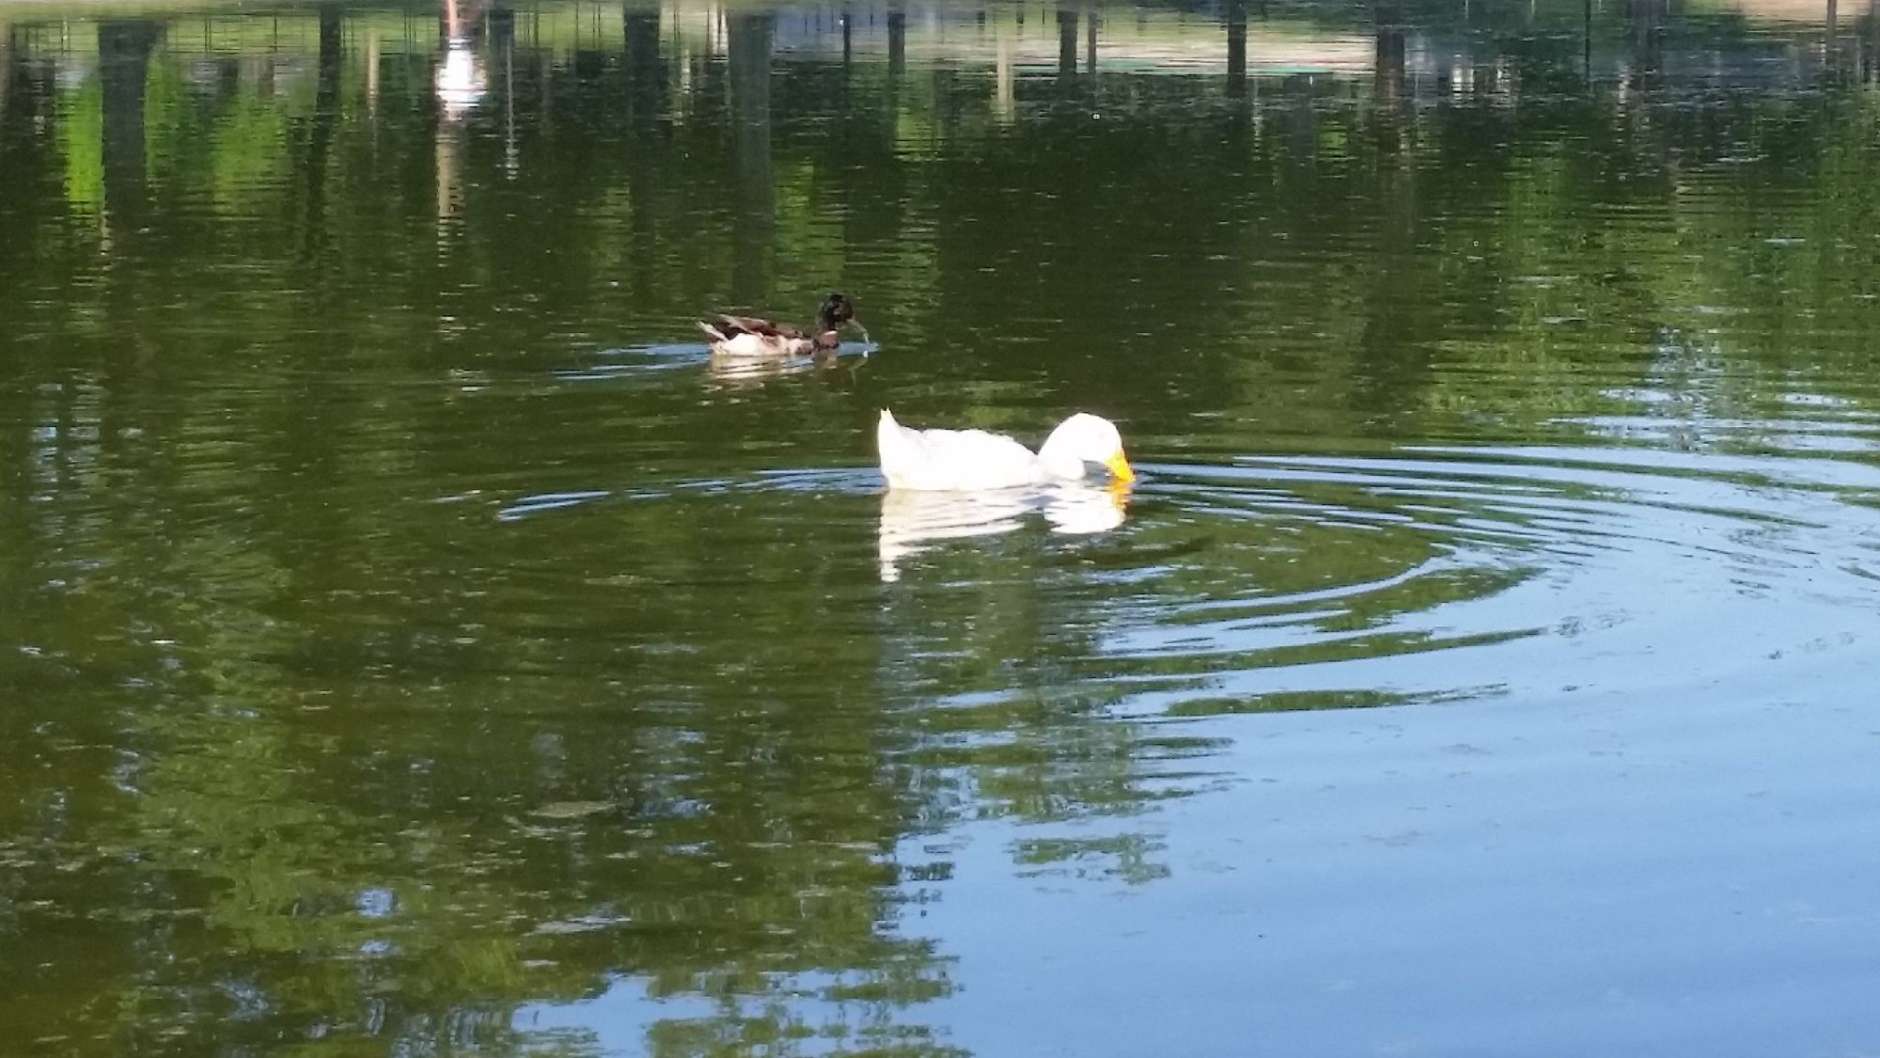 Officials say the pool’s cleaning comes after a water-borne parasite affected the local duck population. (WTOP/Kathy Stewart)